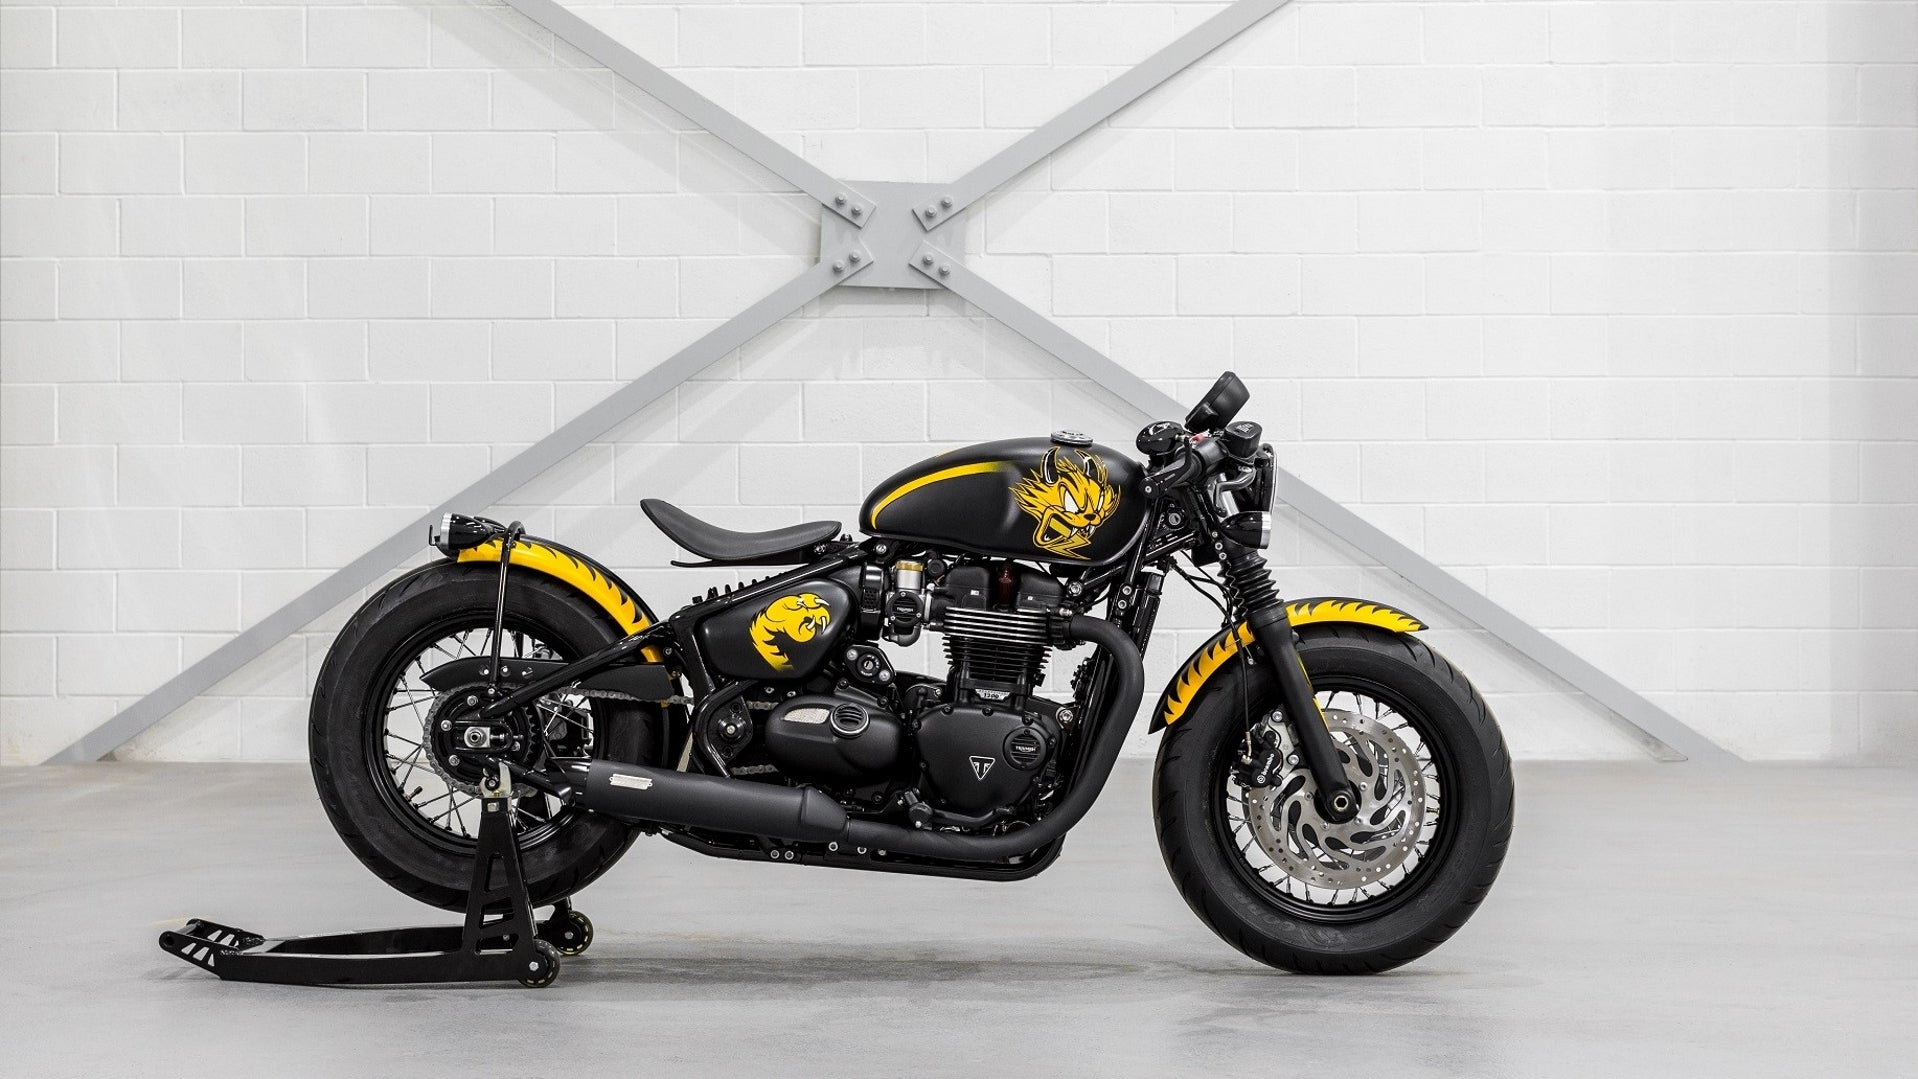 You Could Win One of These Spirit of '59 Triumph Motorcycles